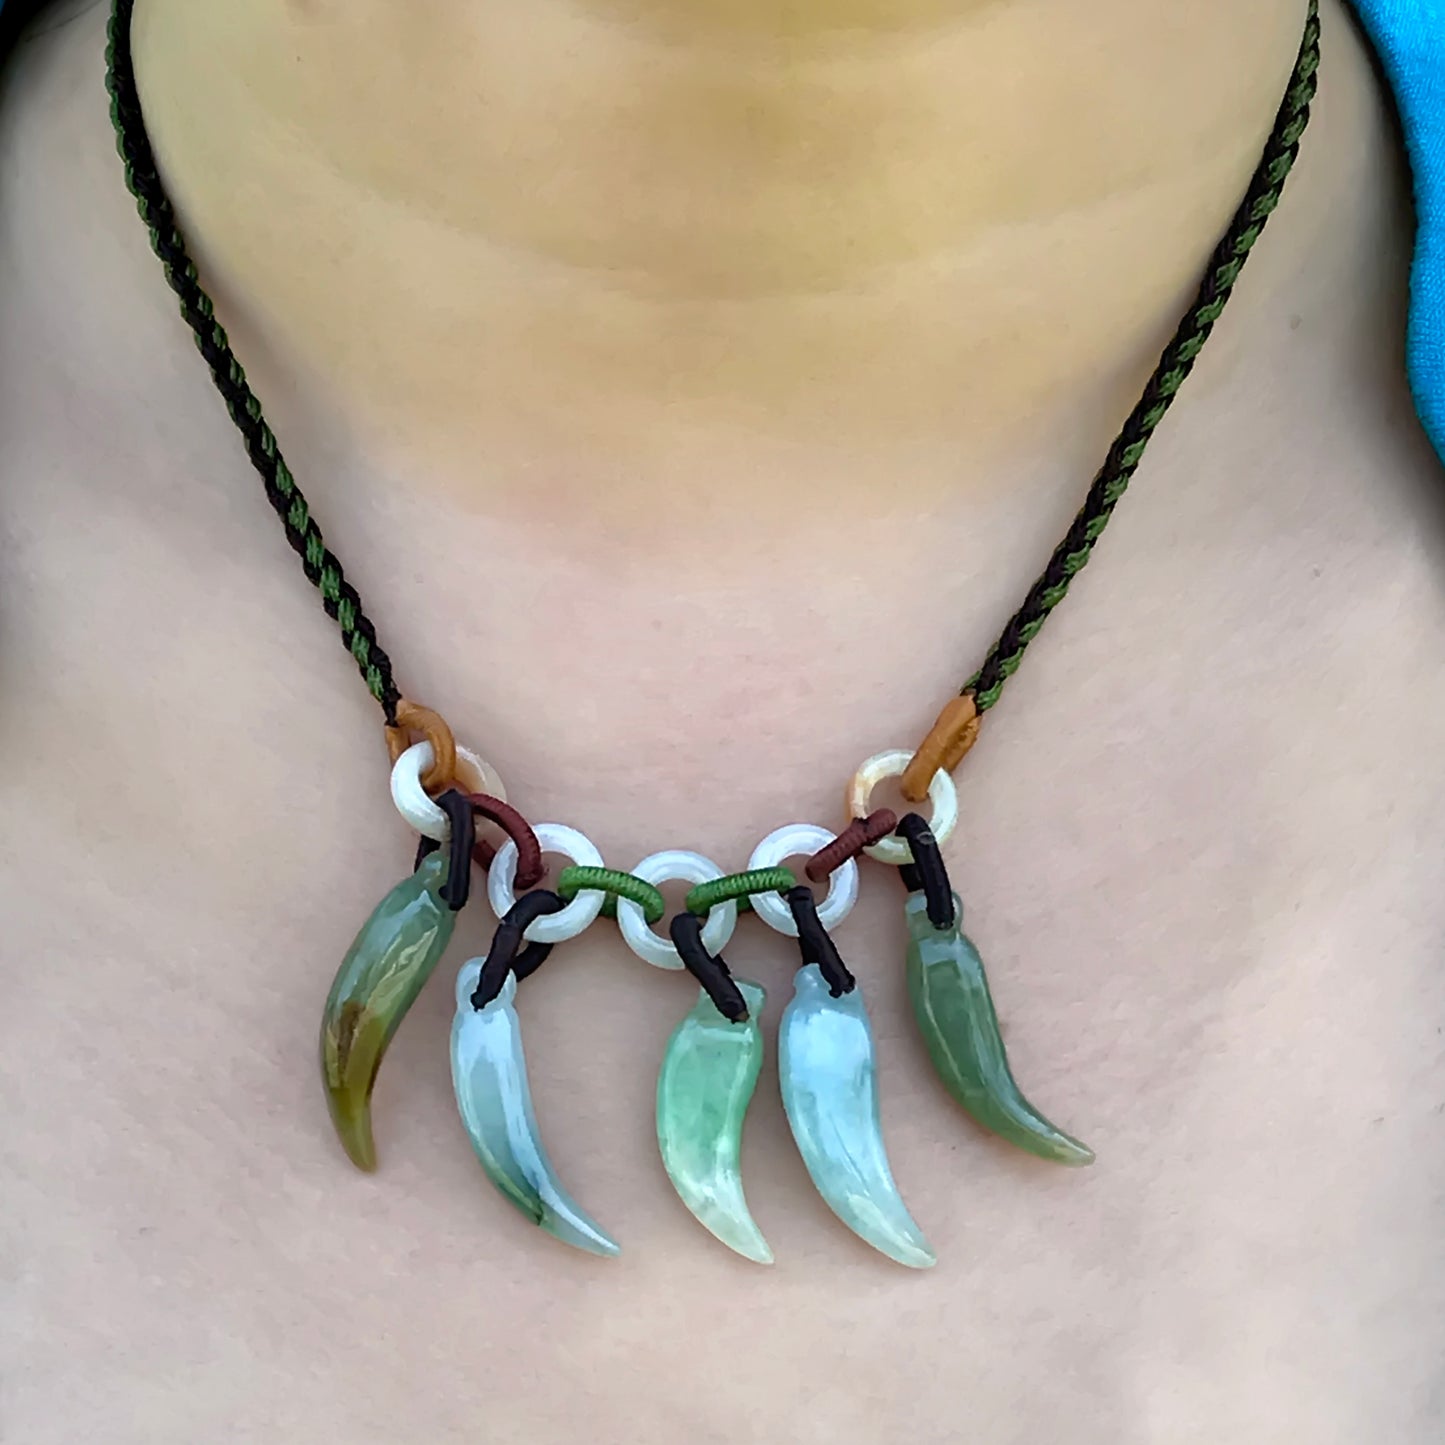 Spice your life with this Chili Handmade Jade Necklace